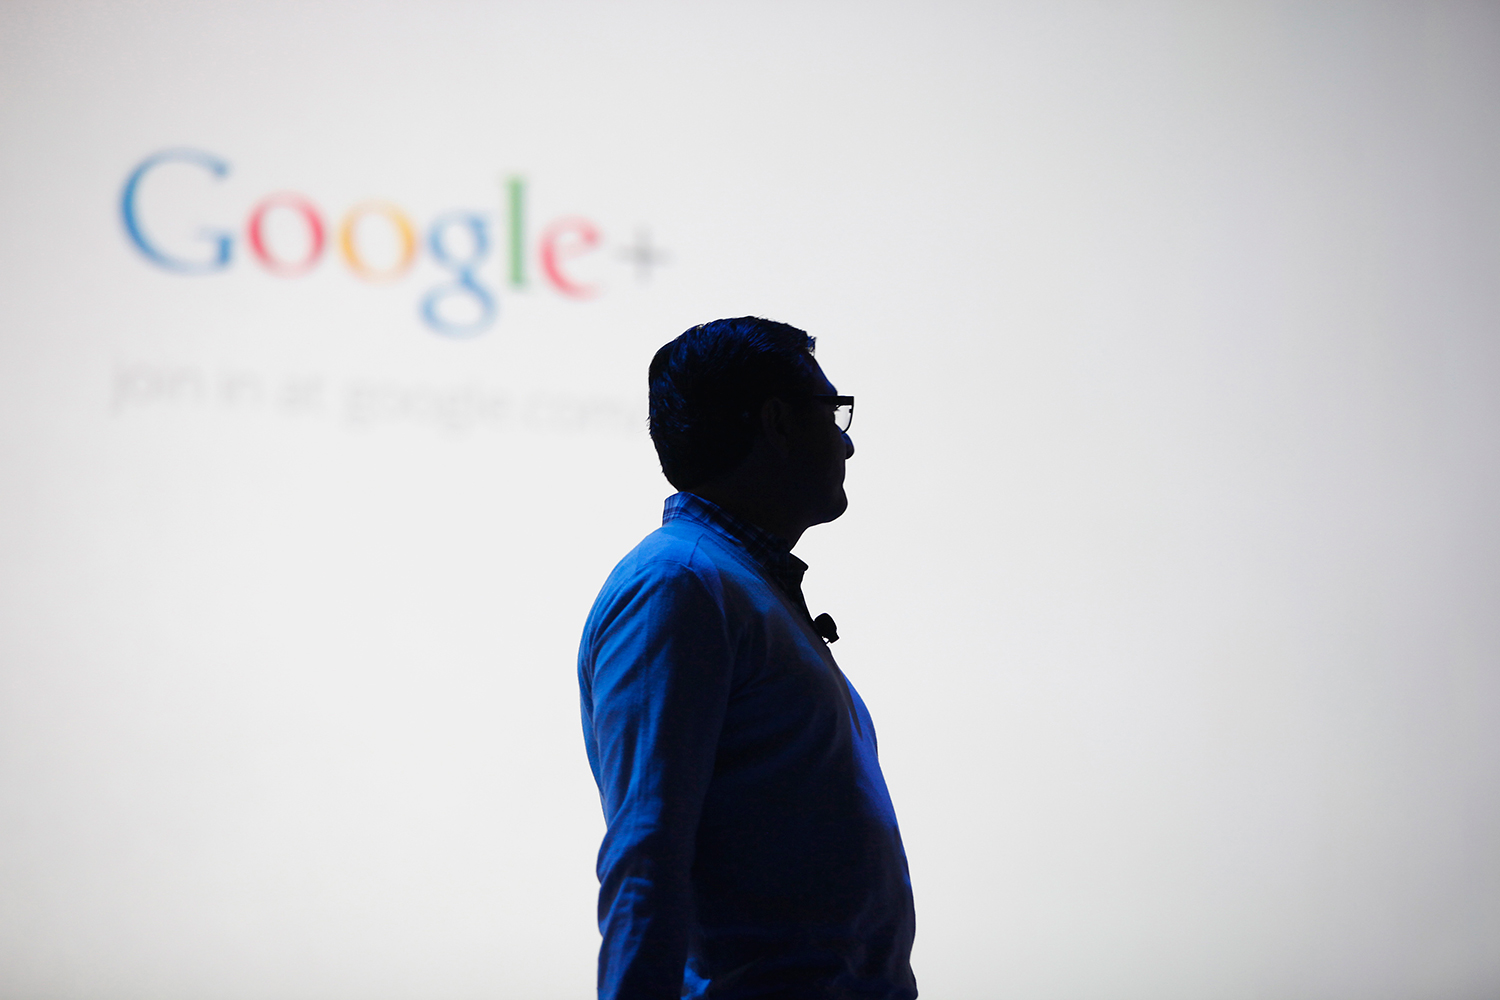 Founder of Google+, Vic Gundotra, returns to the tech world with a new project